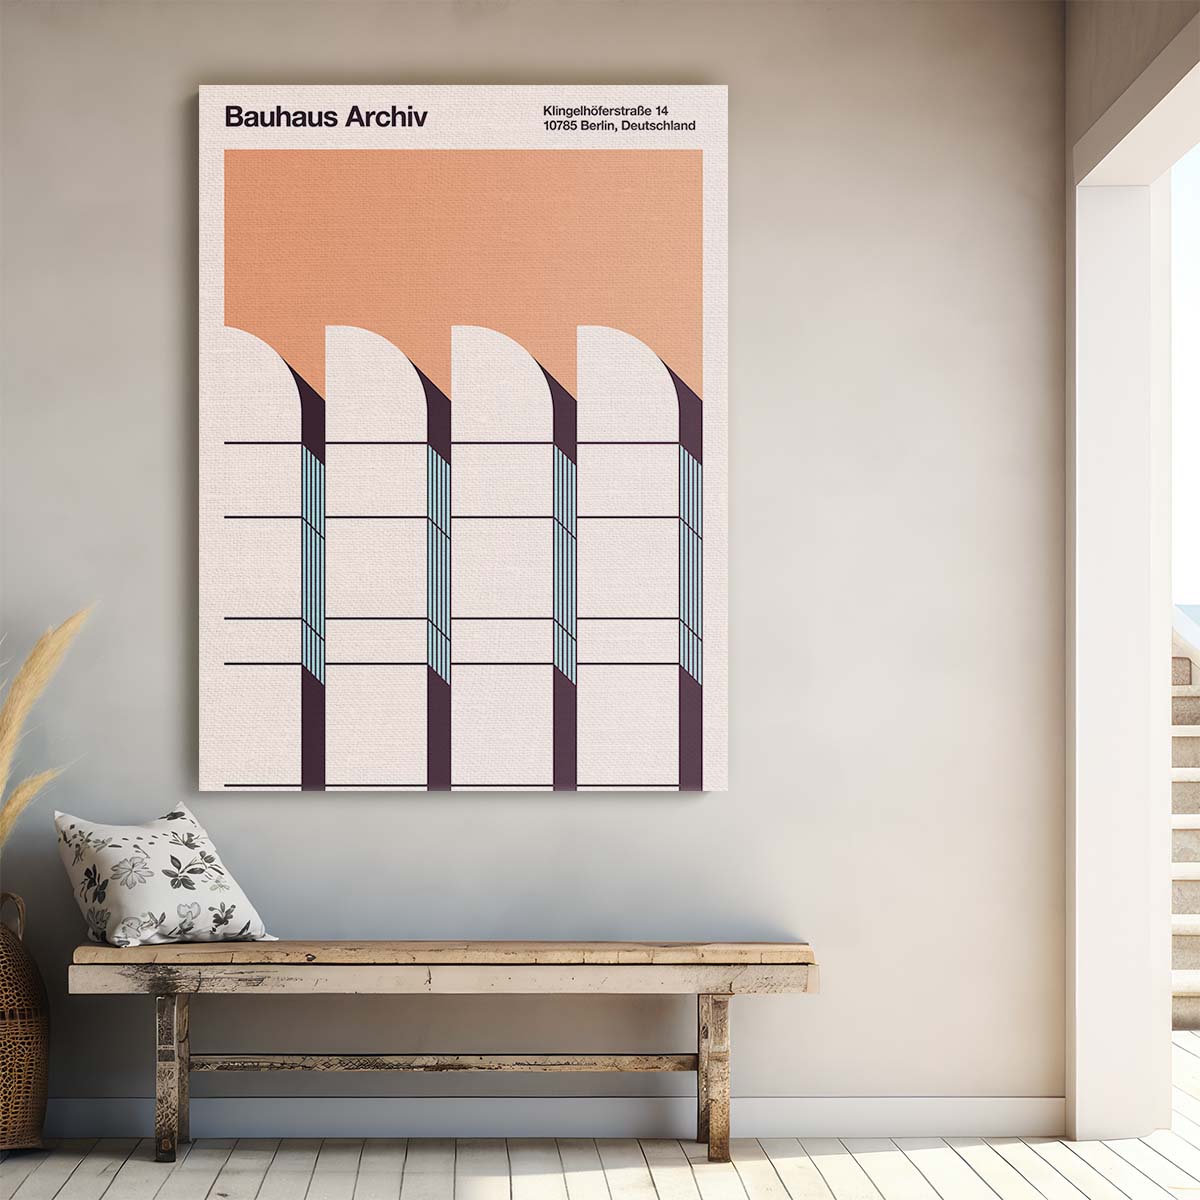 Bauhaus Archiv Vintage, Geometric Illustration Wall Art Poster by Luxuriance Designs, made in USA